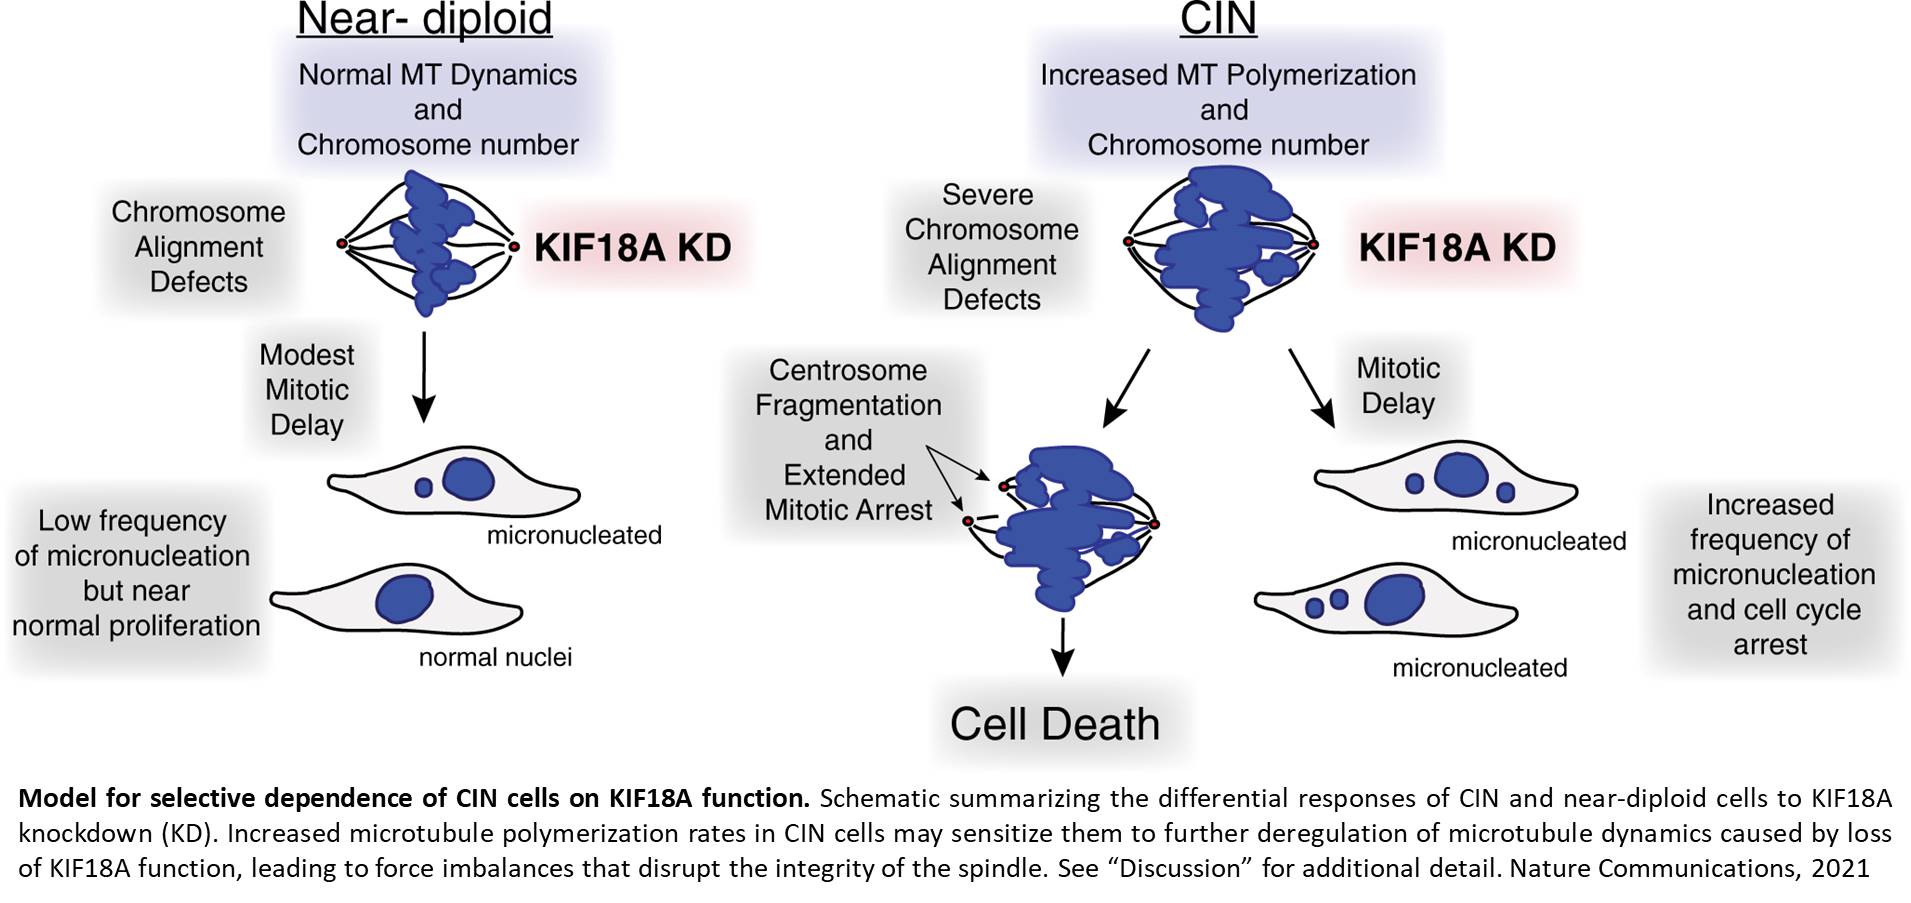 Chromosomally unstable tumor cells specifically require KIF18A for proliferation